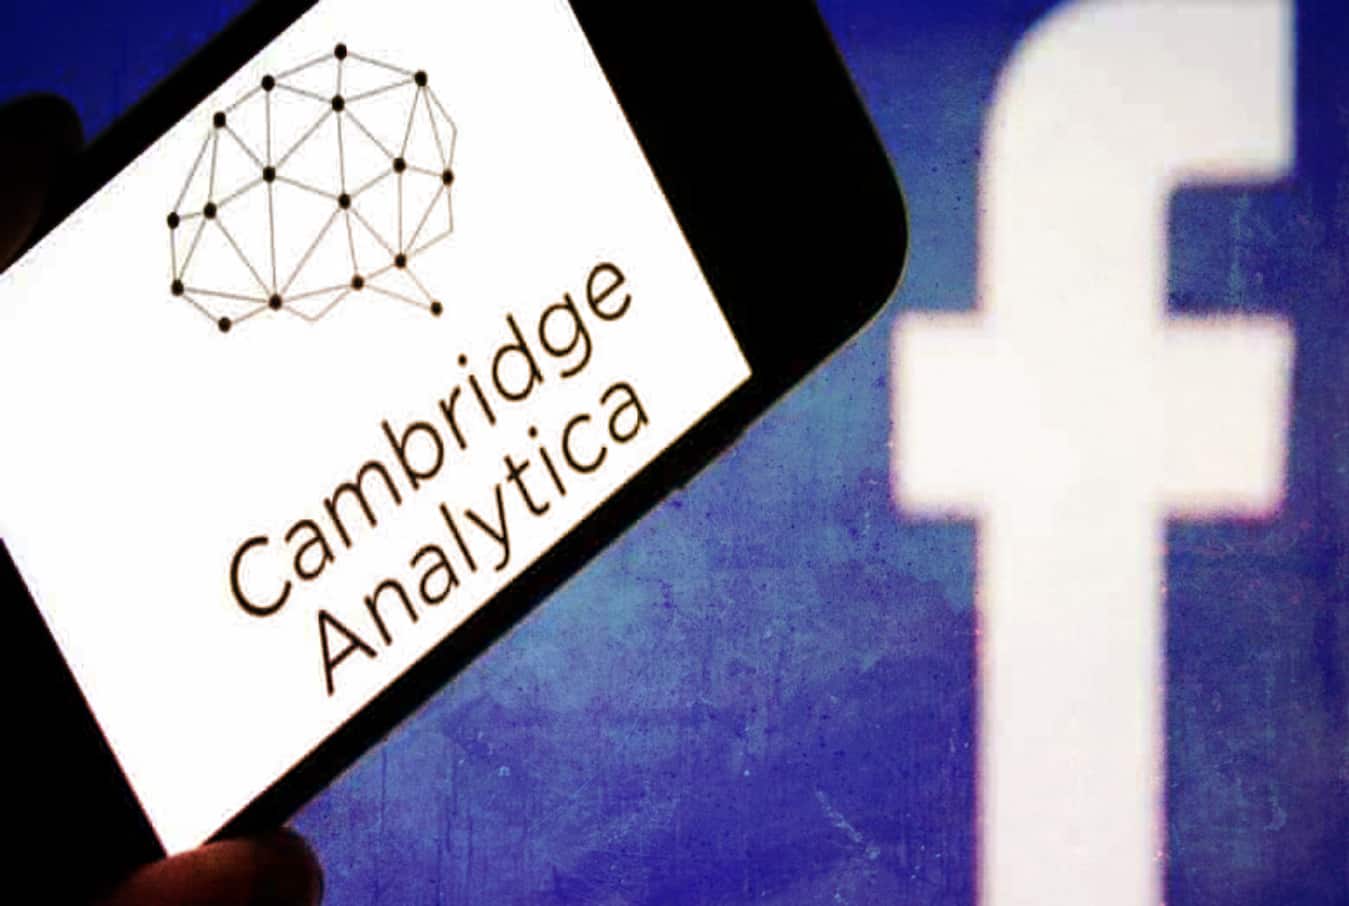 Cambridge Analytica scandal: Facebook hit with $1.6 million fine